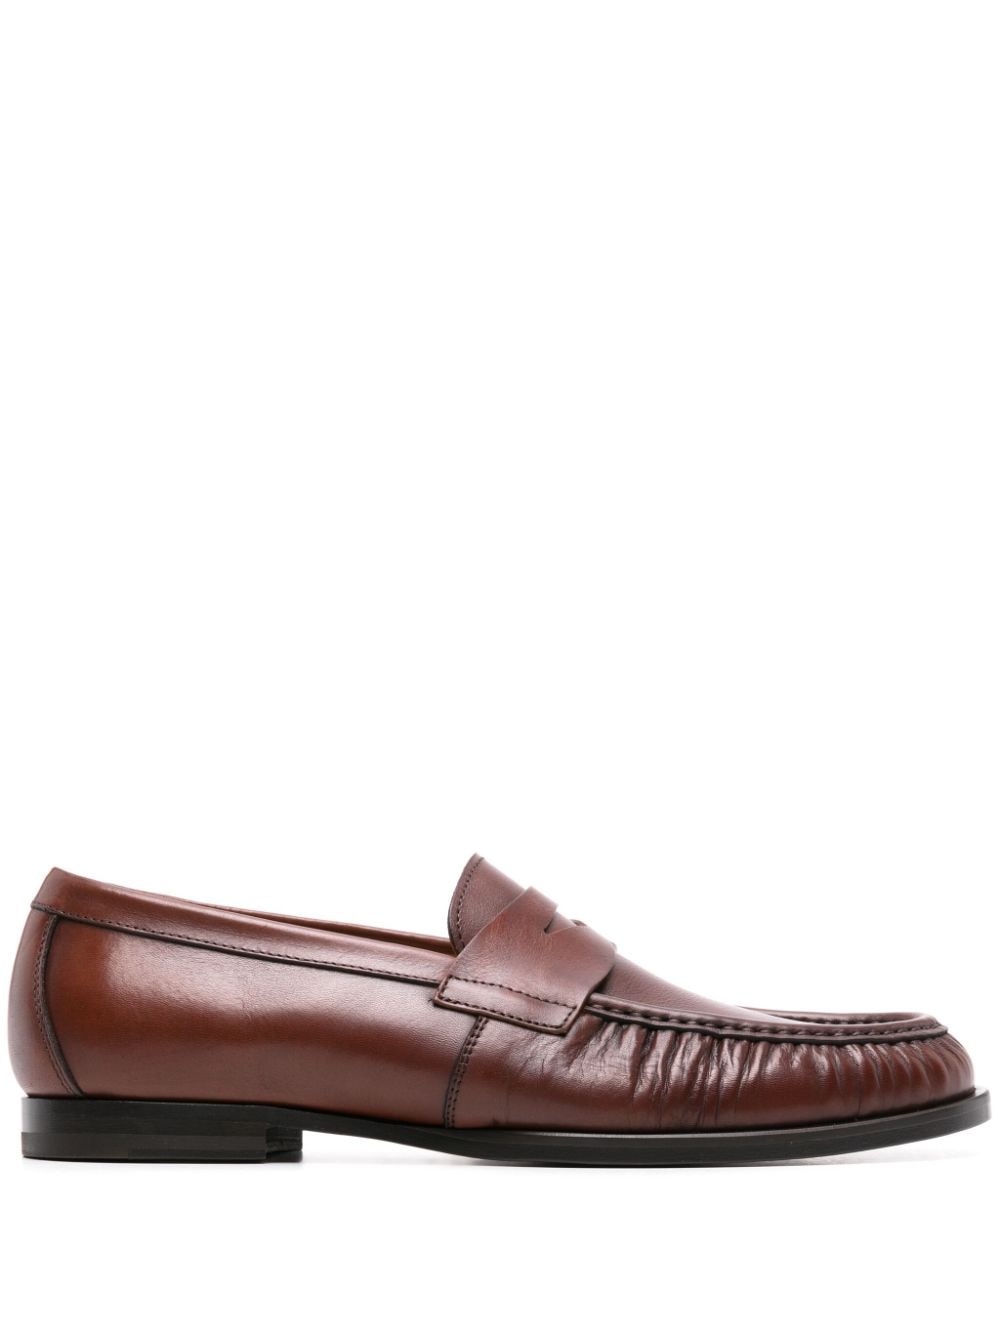 Fred leather loafers